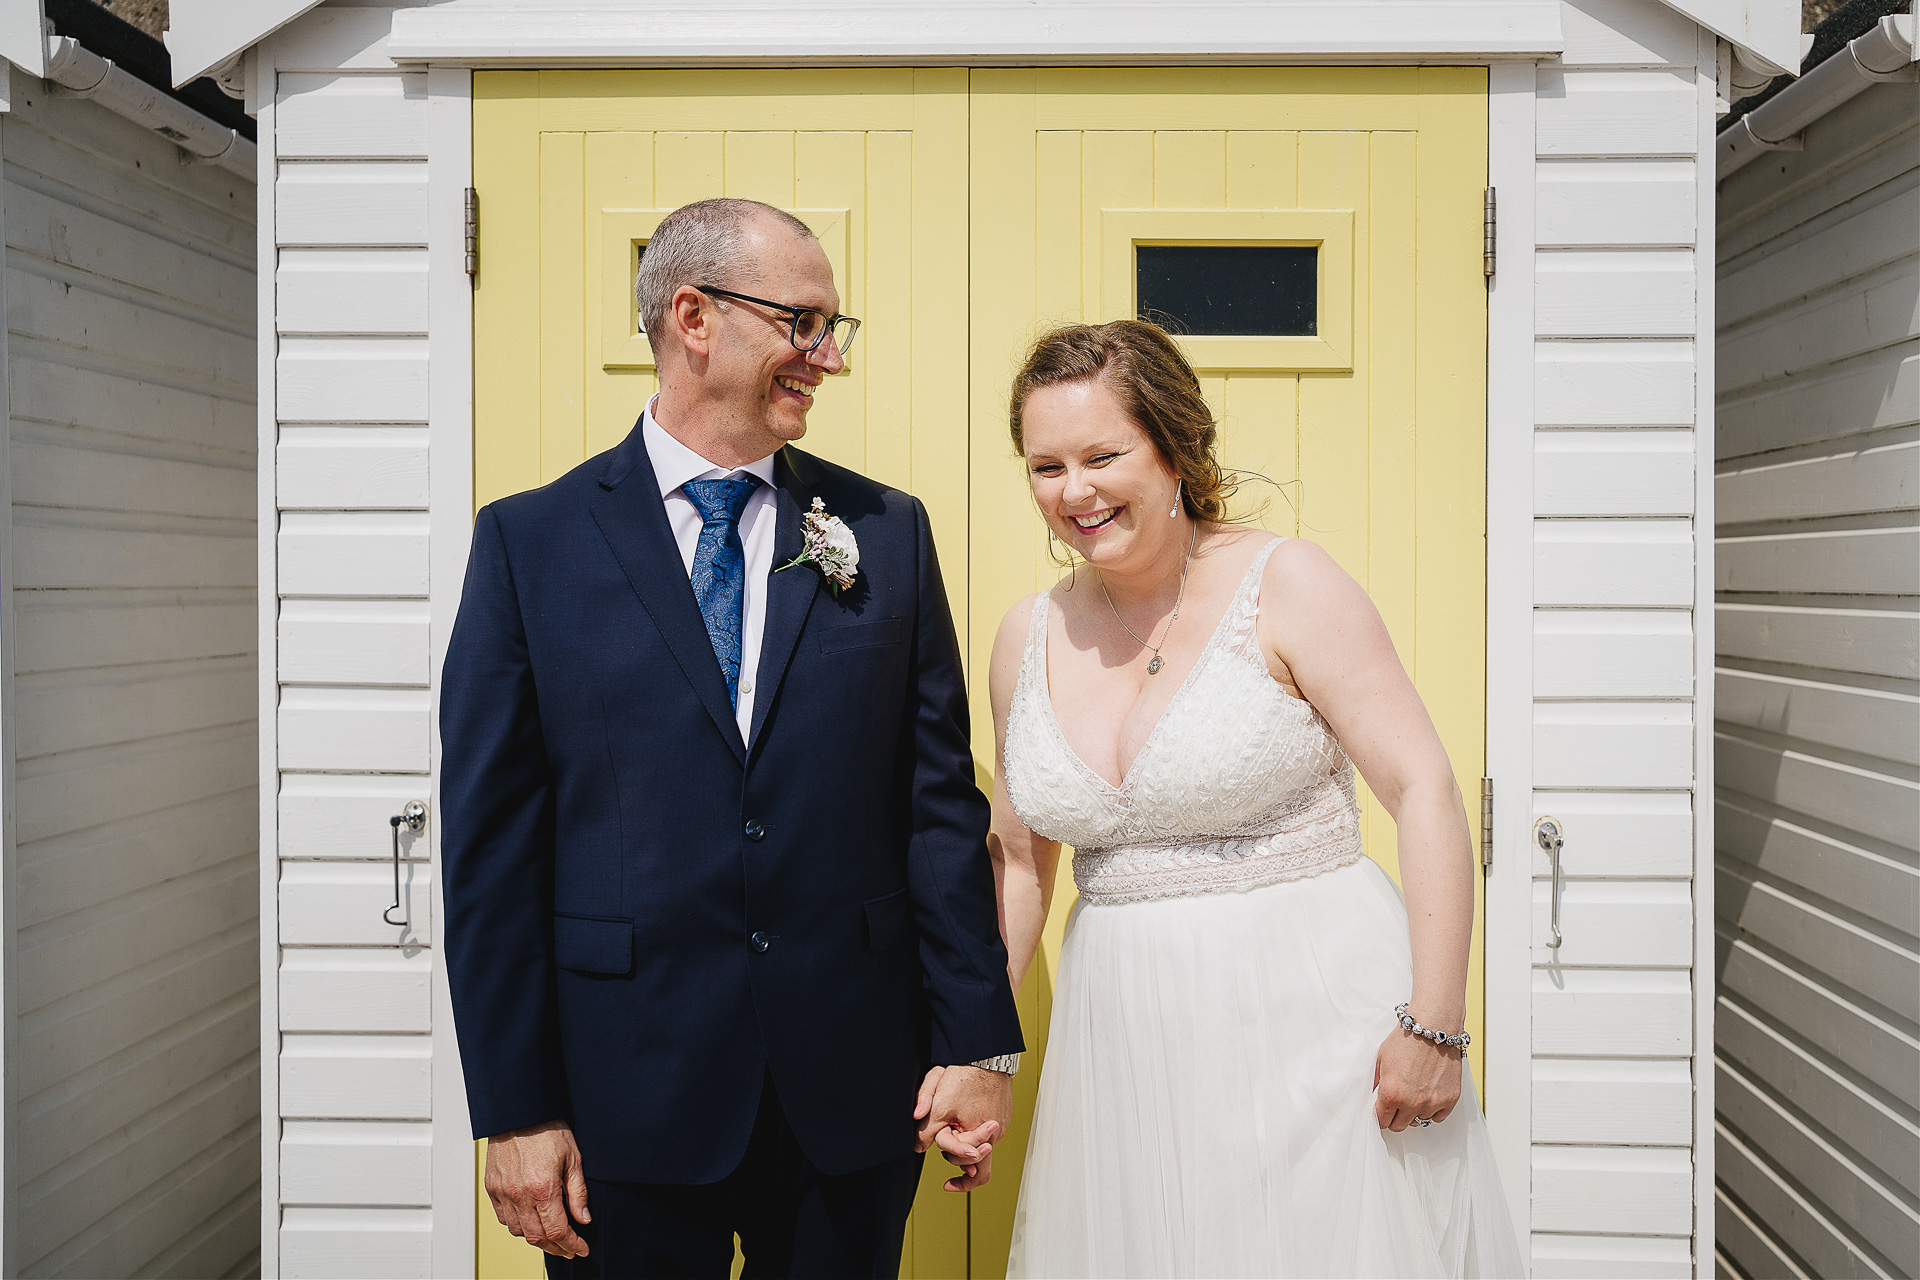 A bride and groom laughing together in front of a yellow beach hut